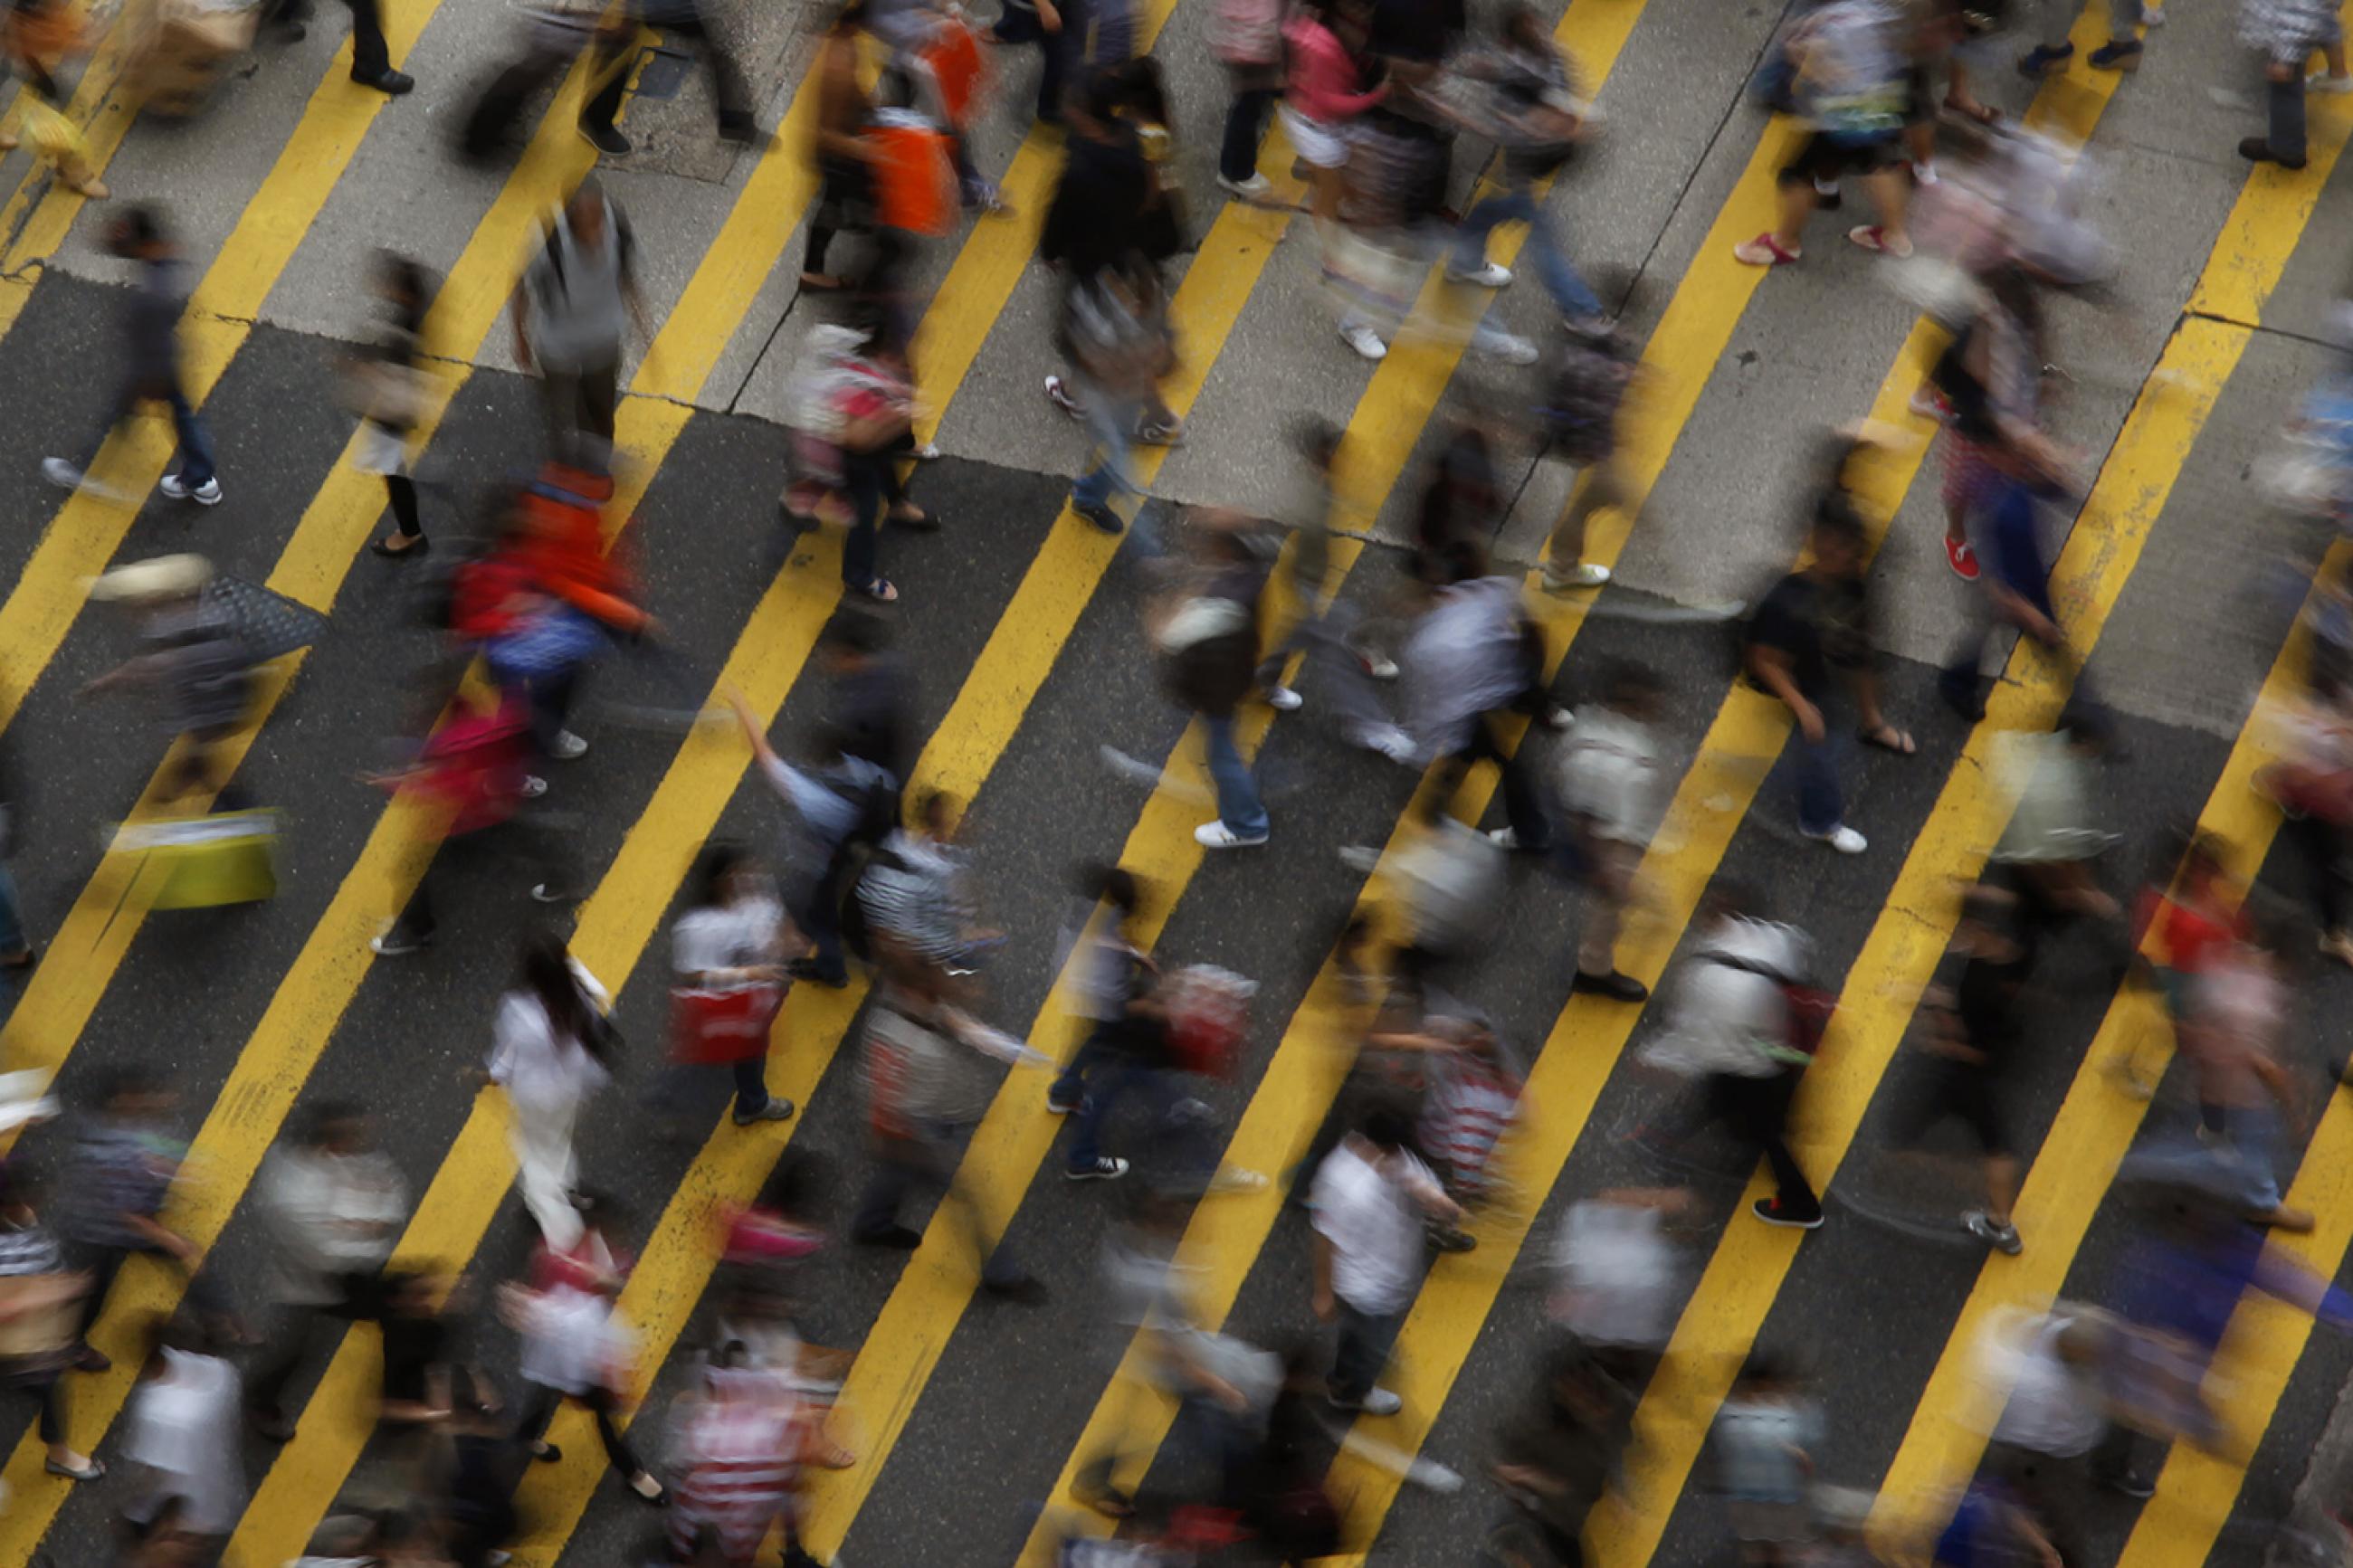 You wouldn’t know it from this image of hustle-bustle on the streets of the Mong Kok district in Hong Kong on Oct. 4, 2011, but the workforce in many Asian economic powerhouses is steadily shrinking. Picture shows the street from above, a wide pedestrian walkway with broad yellow lines painted at an angle. Dozens of people can be seen in the frame, all blurred due to fast movement and a slow shutter. REUTERS/Bobby Yip